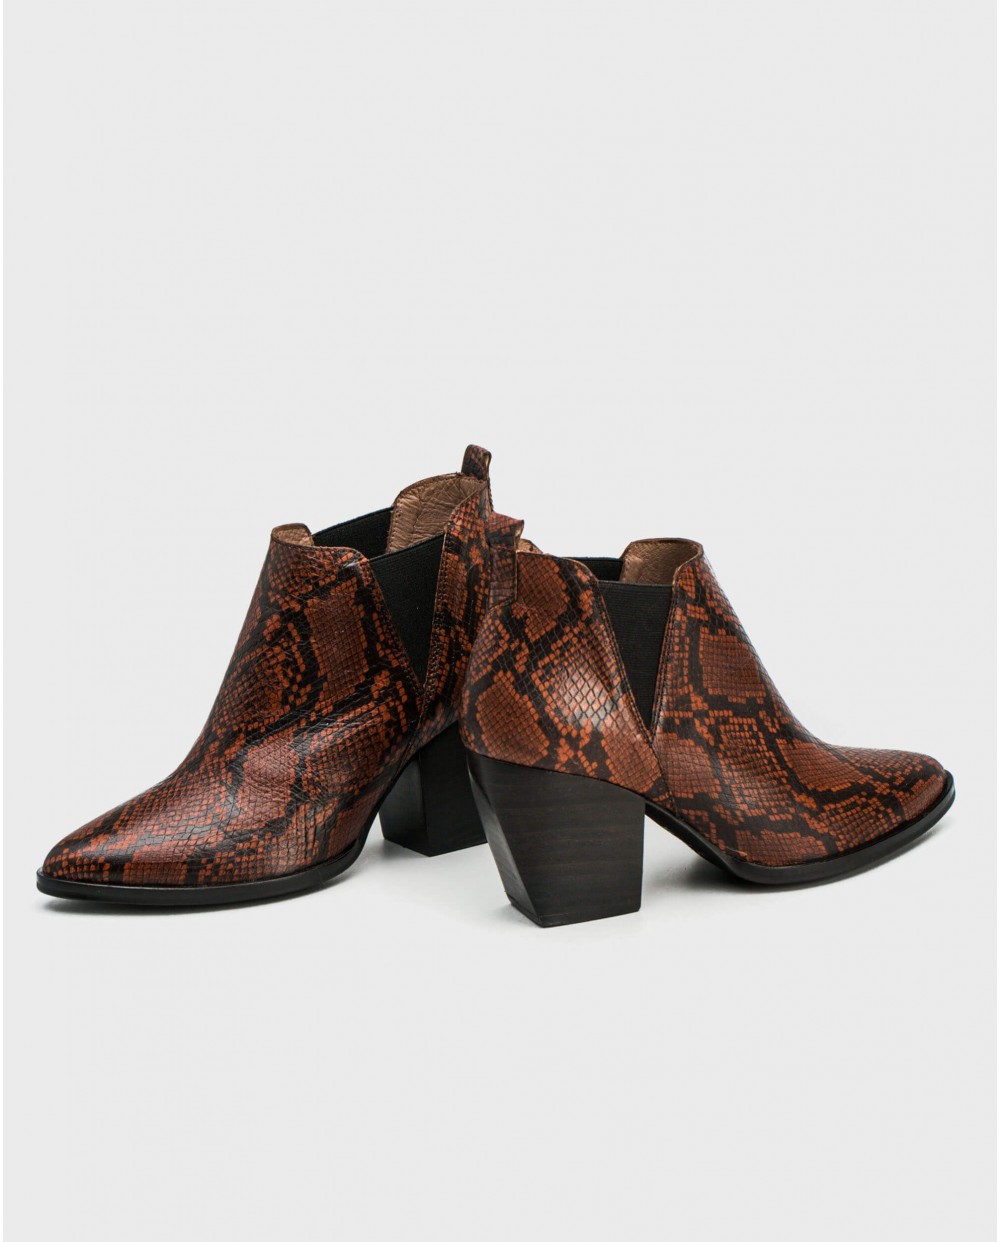 Wonders-Outlet-Animal print cowboy ankle boot